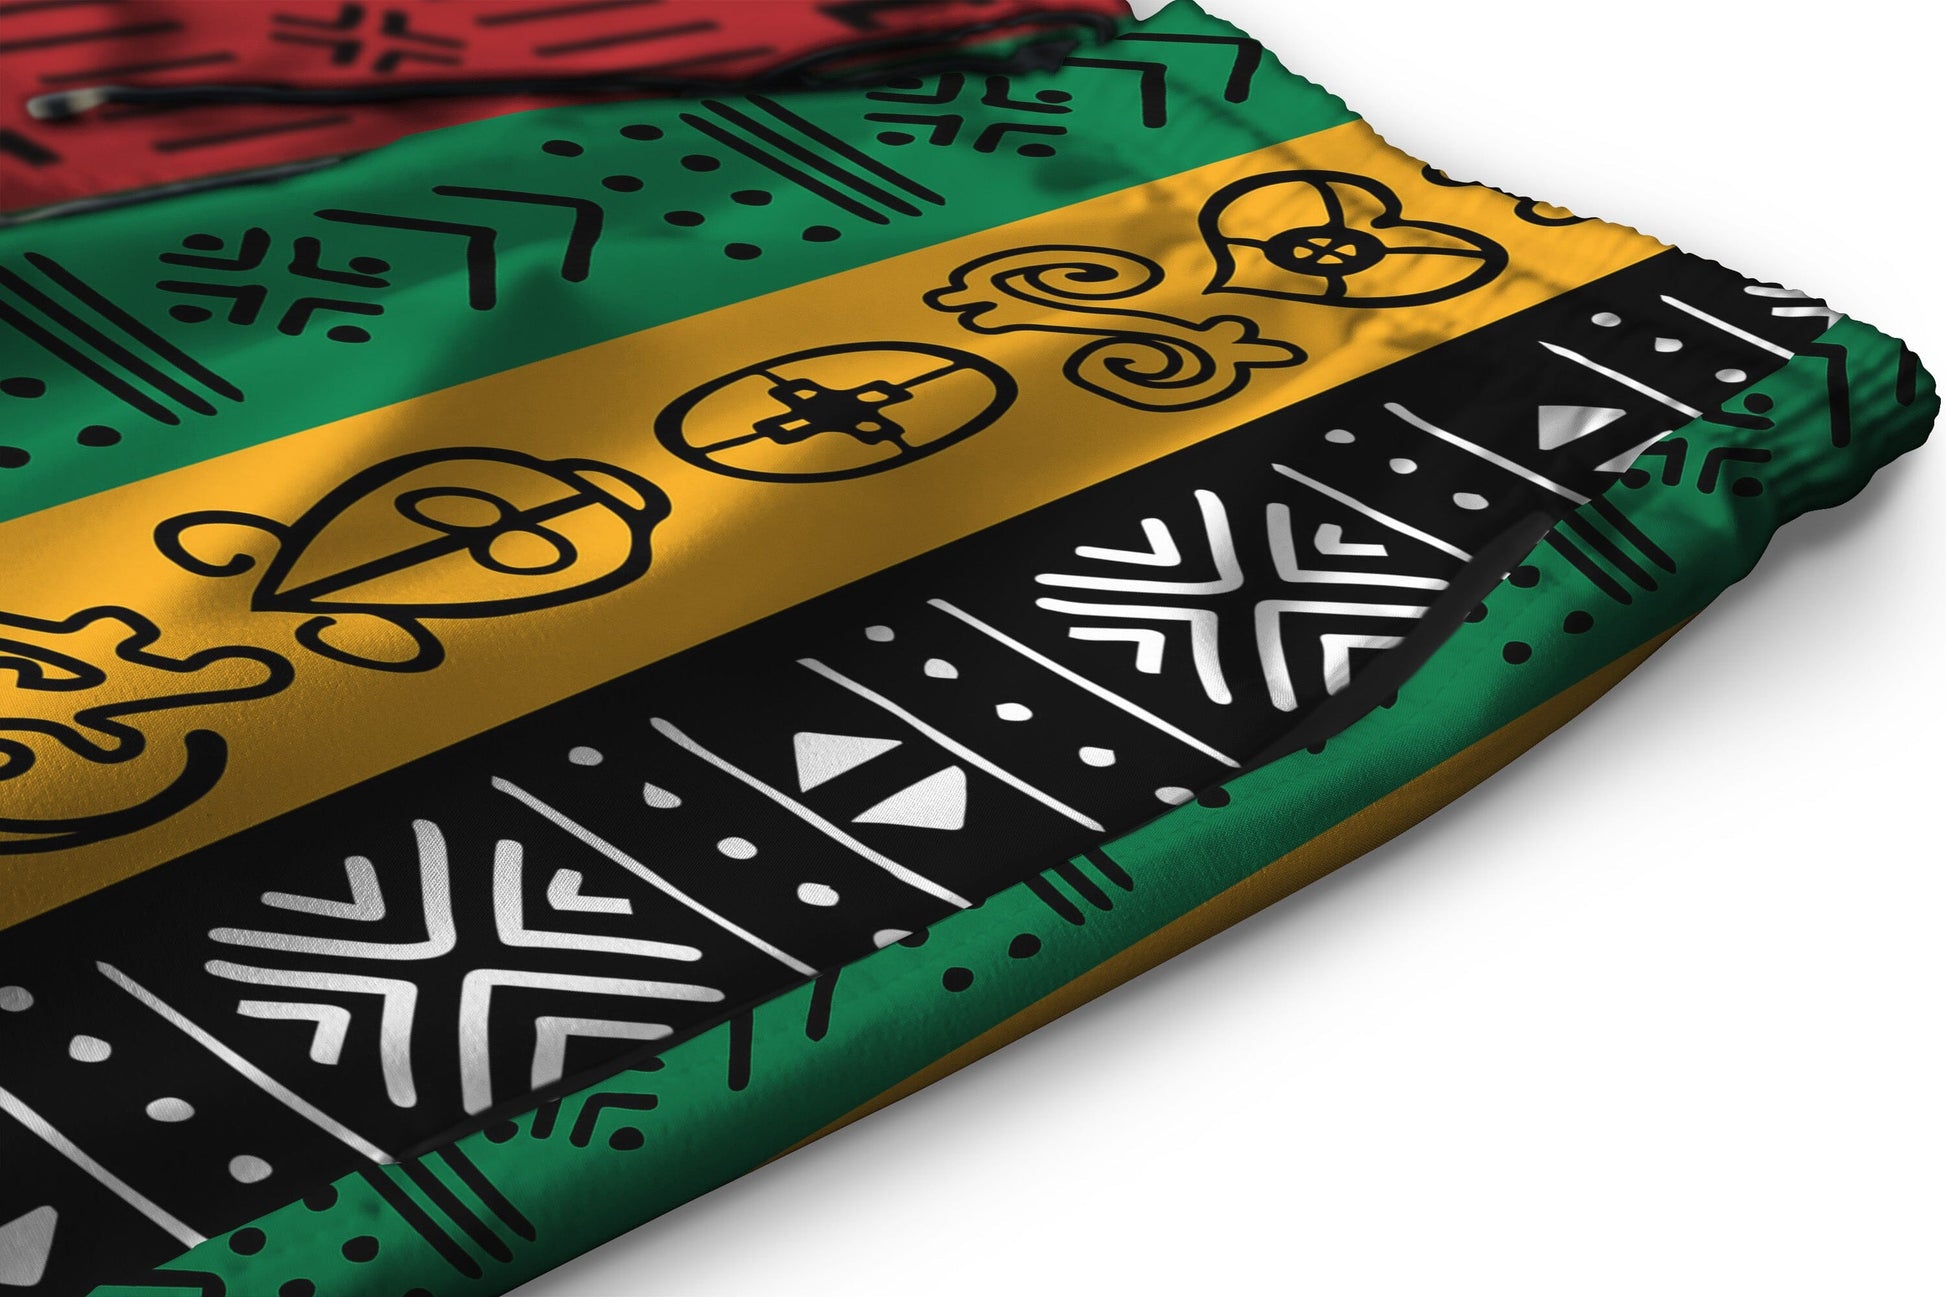 African Symbols In Pan African Colors Shorts Shorts Tianci 